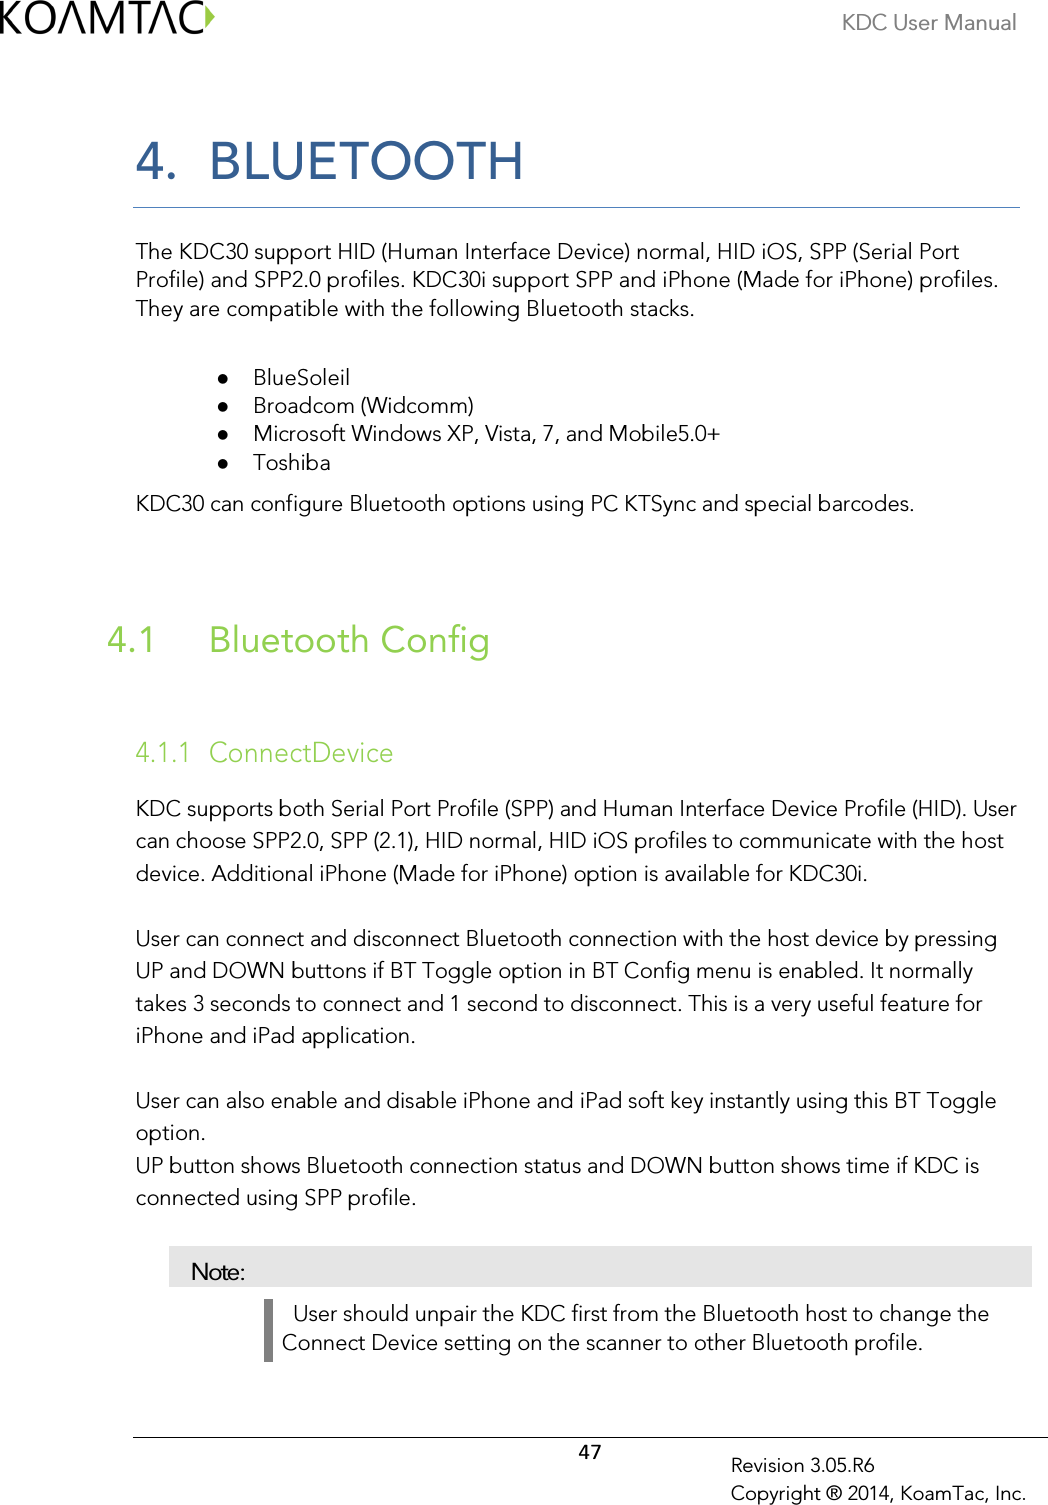 KDC User Manual  47 Revision 3.05.R6 Copyright ® 2014, KoamTac, Inc. 4. BLUETOOTH  The KDC30 support HID (Human Interface Device) normal, HID iOS, SPP (Serial Port Profile) and SPP2.0 profiles. KDC30i support SPP and iPhone (Made for iPhone) profiles. They are compatible with the following Bluetooth stacks.   BlueSoleil   Broadcom (Widcomm)   Microsoft Windows XP, Vista, 7, and Mobile5.0+  Toshiba KDC30 can configure Bluetooth options using PC KTSync and special barcodes.     Bluetooth Config 4.1   4.1.1 ConnectDevice  KDC supports both Serial Port Profile (SPP) and Human Interface Device Profile (HID). User can choose SPP2.0, SPP (2.1), HID normal, HID iOS profiles to communicate with the host device. Additional iPhone (Made for iPhone) option is available for KDC30i.  User can connect and disconnect Bluetooth connection with the host device by pressing UP and DOWN buttons if BT Toggle option in BT Config menu is enabled. It normally takes 3 seconds to connect and 1 second to disconnect. This is a very useful feature for iPhone and iPad application.   User can also enable and disable iPhone and iPad soft key instantly using this BT Toggle option.  UP button shows Bluetooth connection status and DOWN button shows time if KDC is connected using SPP profile.  Note:   User should unpair the KDC first from the Bluetooth host to change the Connect Device setting on the scanner to other Bluetooth profile. 